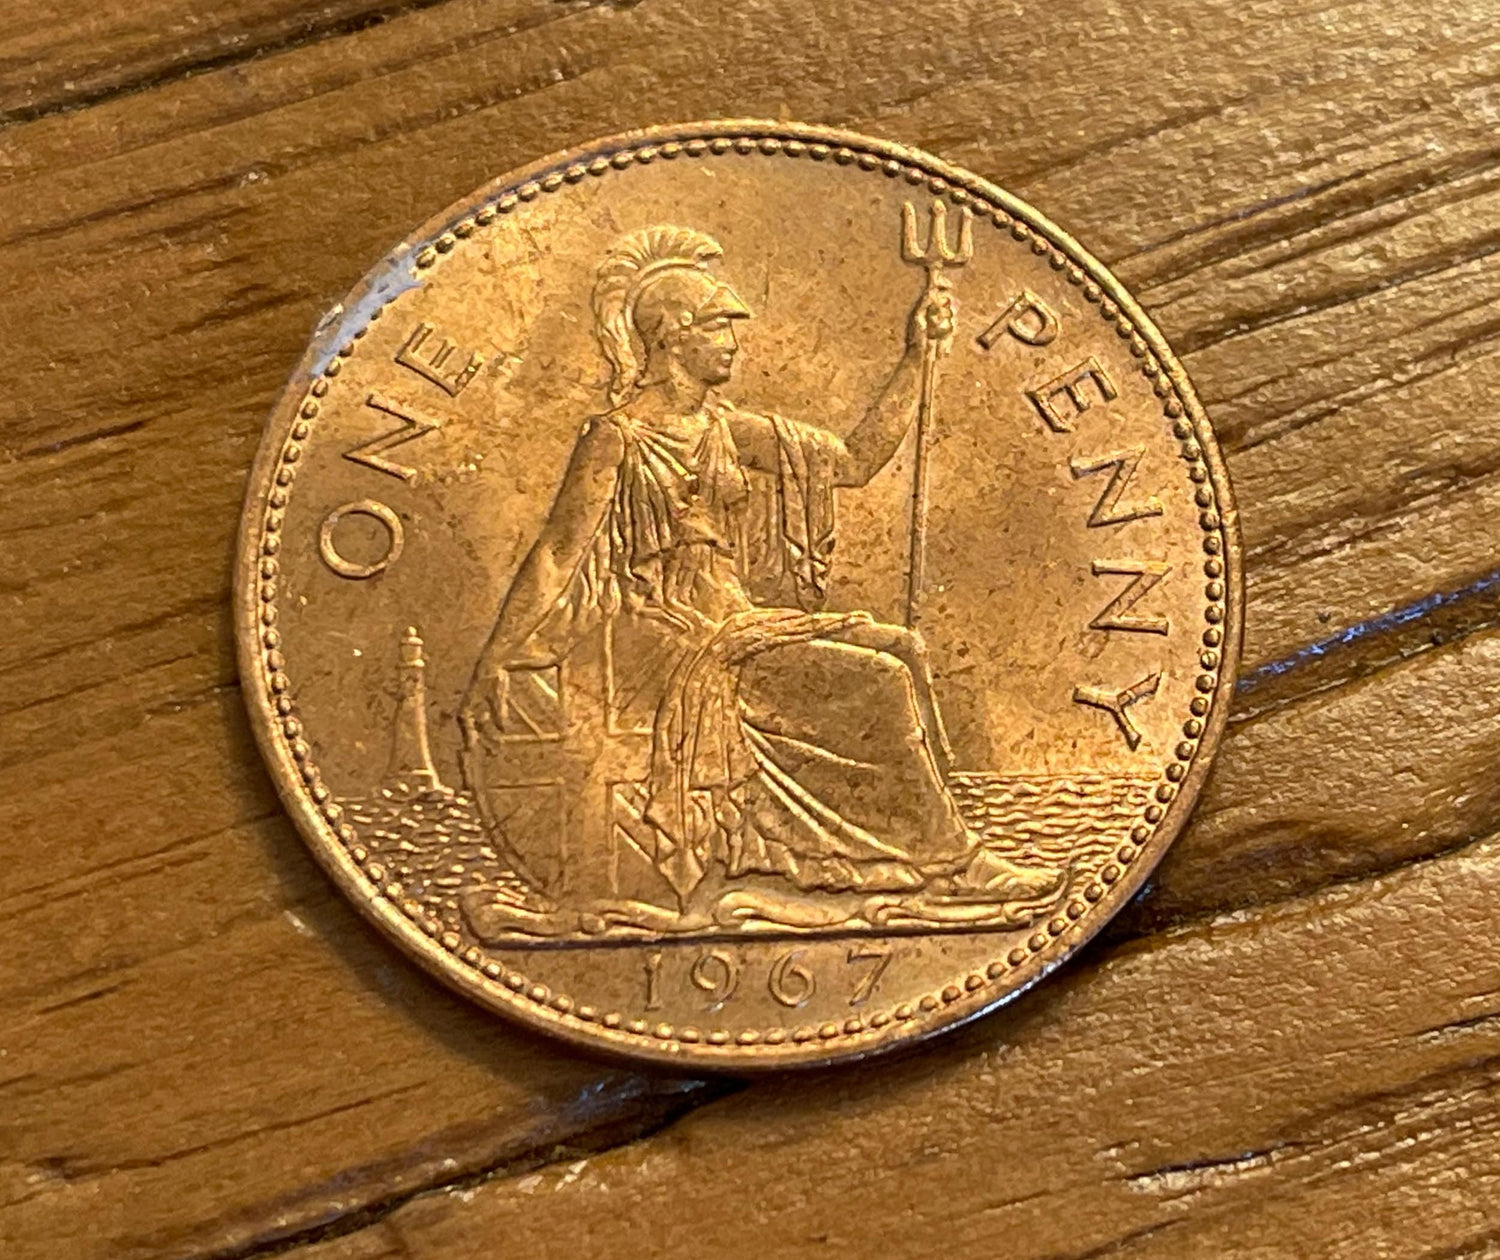 Queen Elizabeth II & Britannia Great Britain 1 Penny Authentic Coin Money for Jewelry and Craft Making